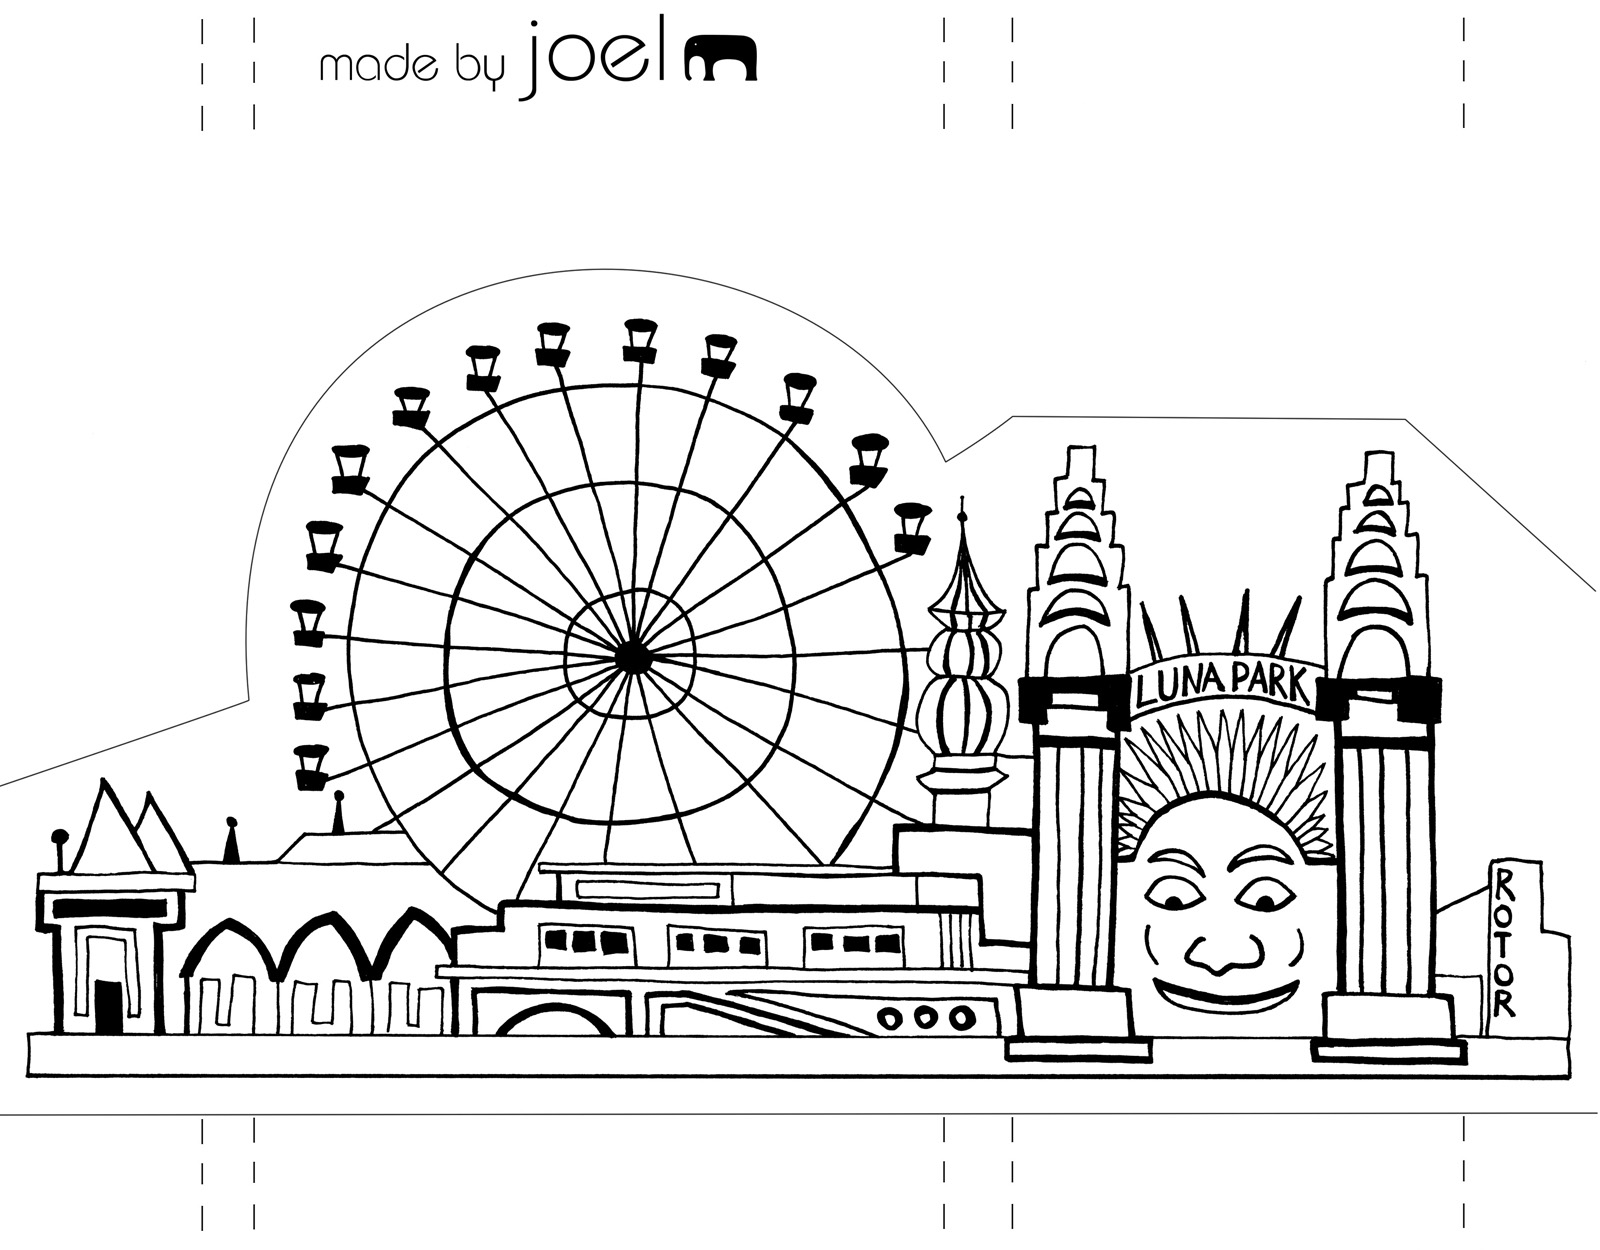 Template Made by Joel Paper City Sydney Luna Park – Made by Joel